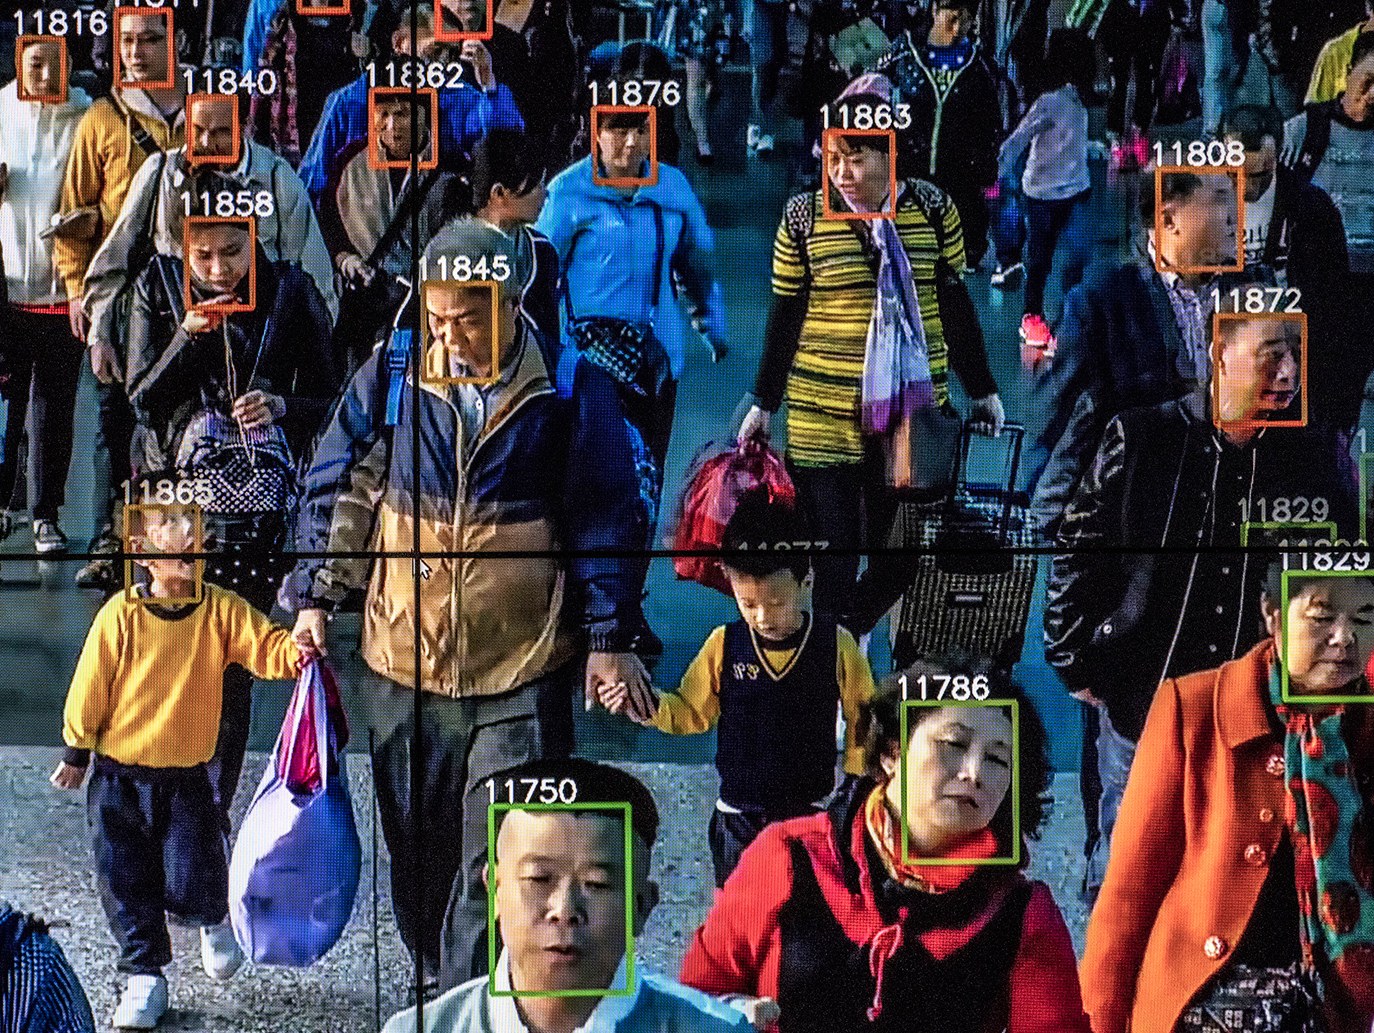 Anti-Fraud: China Introduces Face Scans for Mobile Phone Users